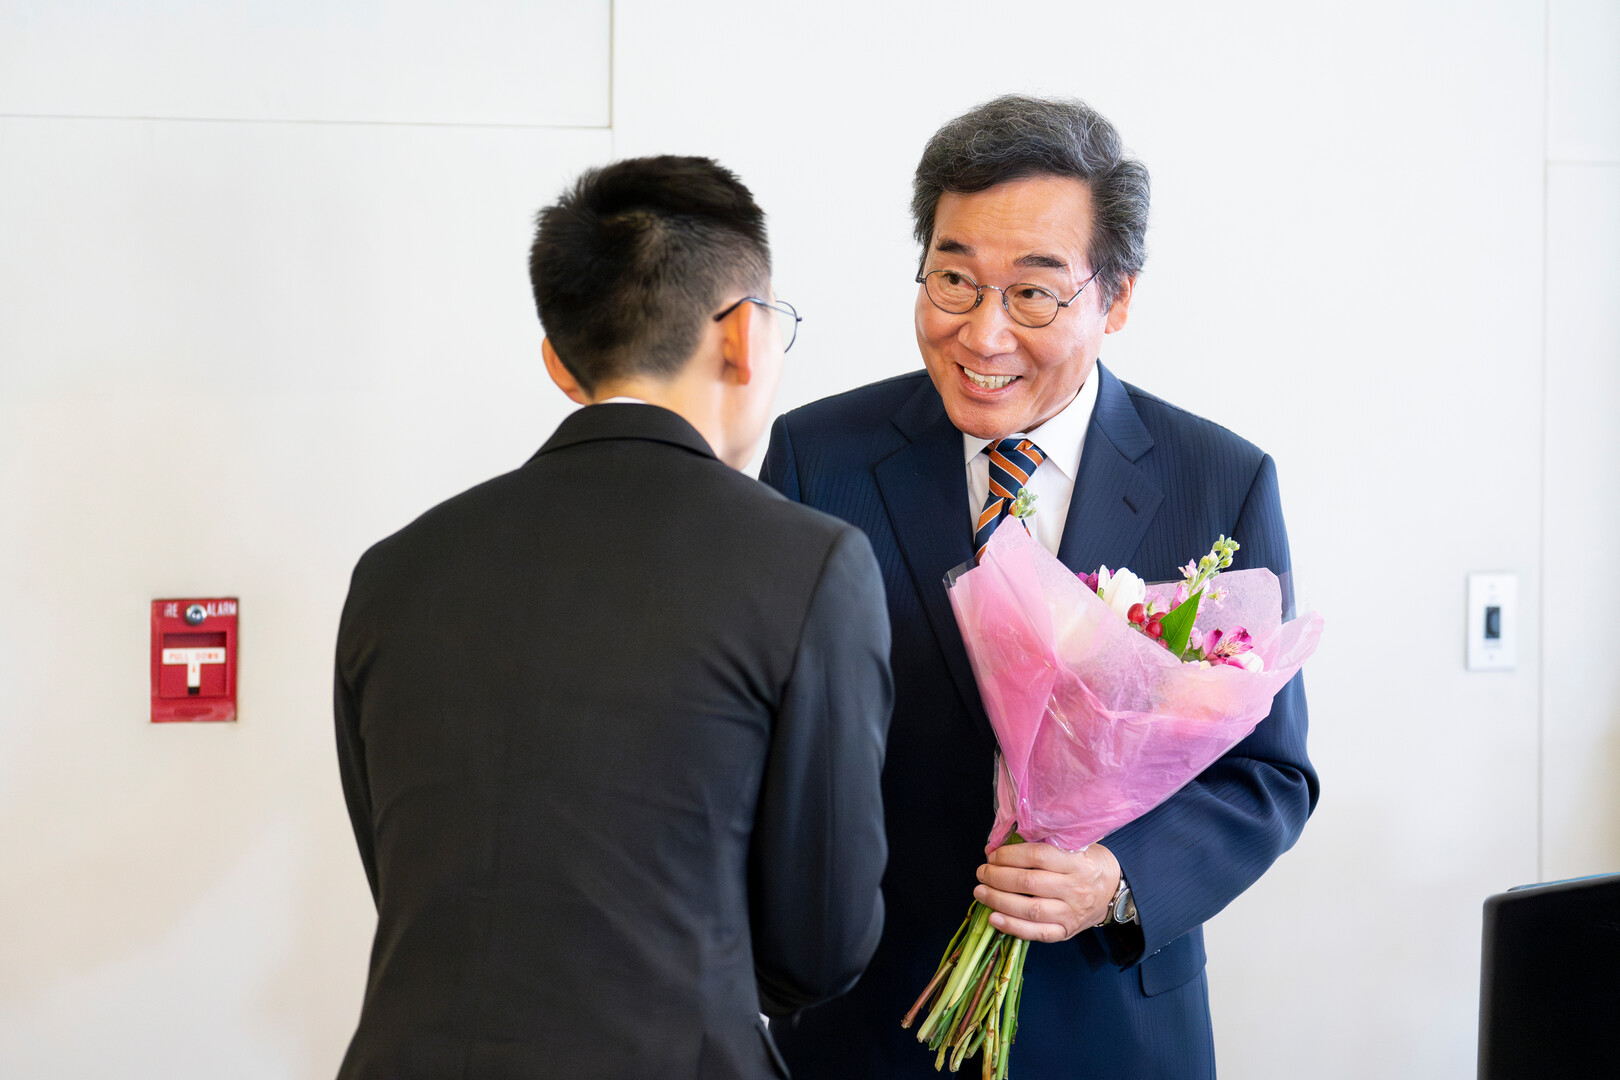 First-year student HeeYeal Lee presents a bouquet of flowers to South Korea's former prime minister, Nakyon Lee, following his speech. Photo by Lonnie Timmons III